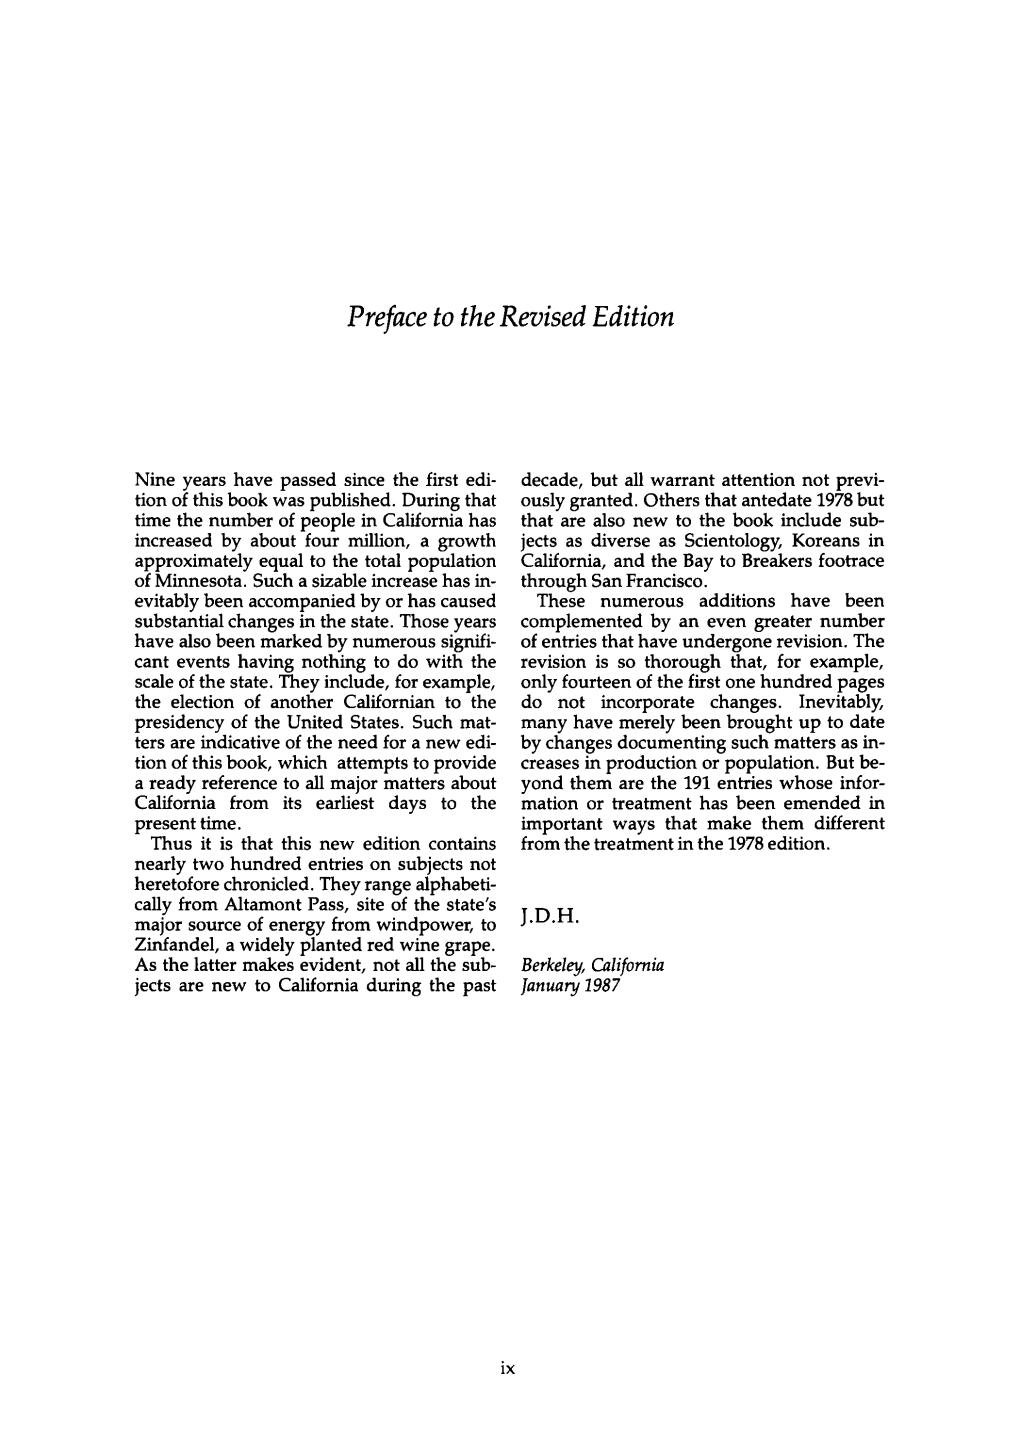 Preface to the Revised Edition